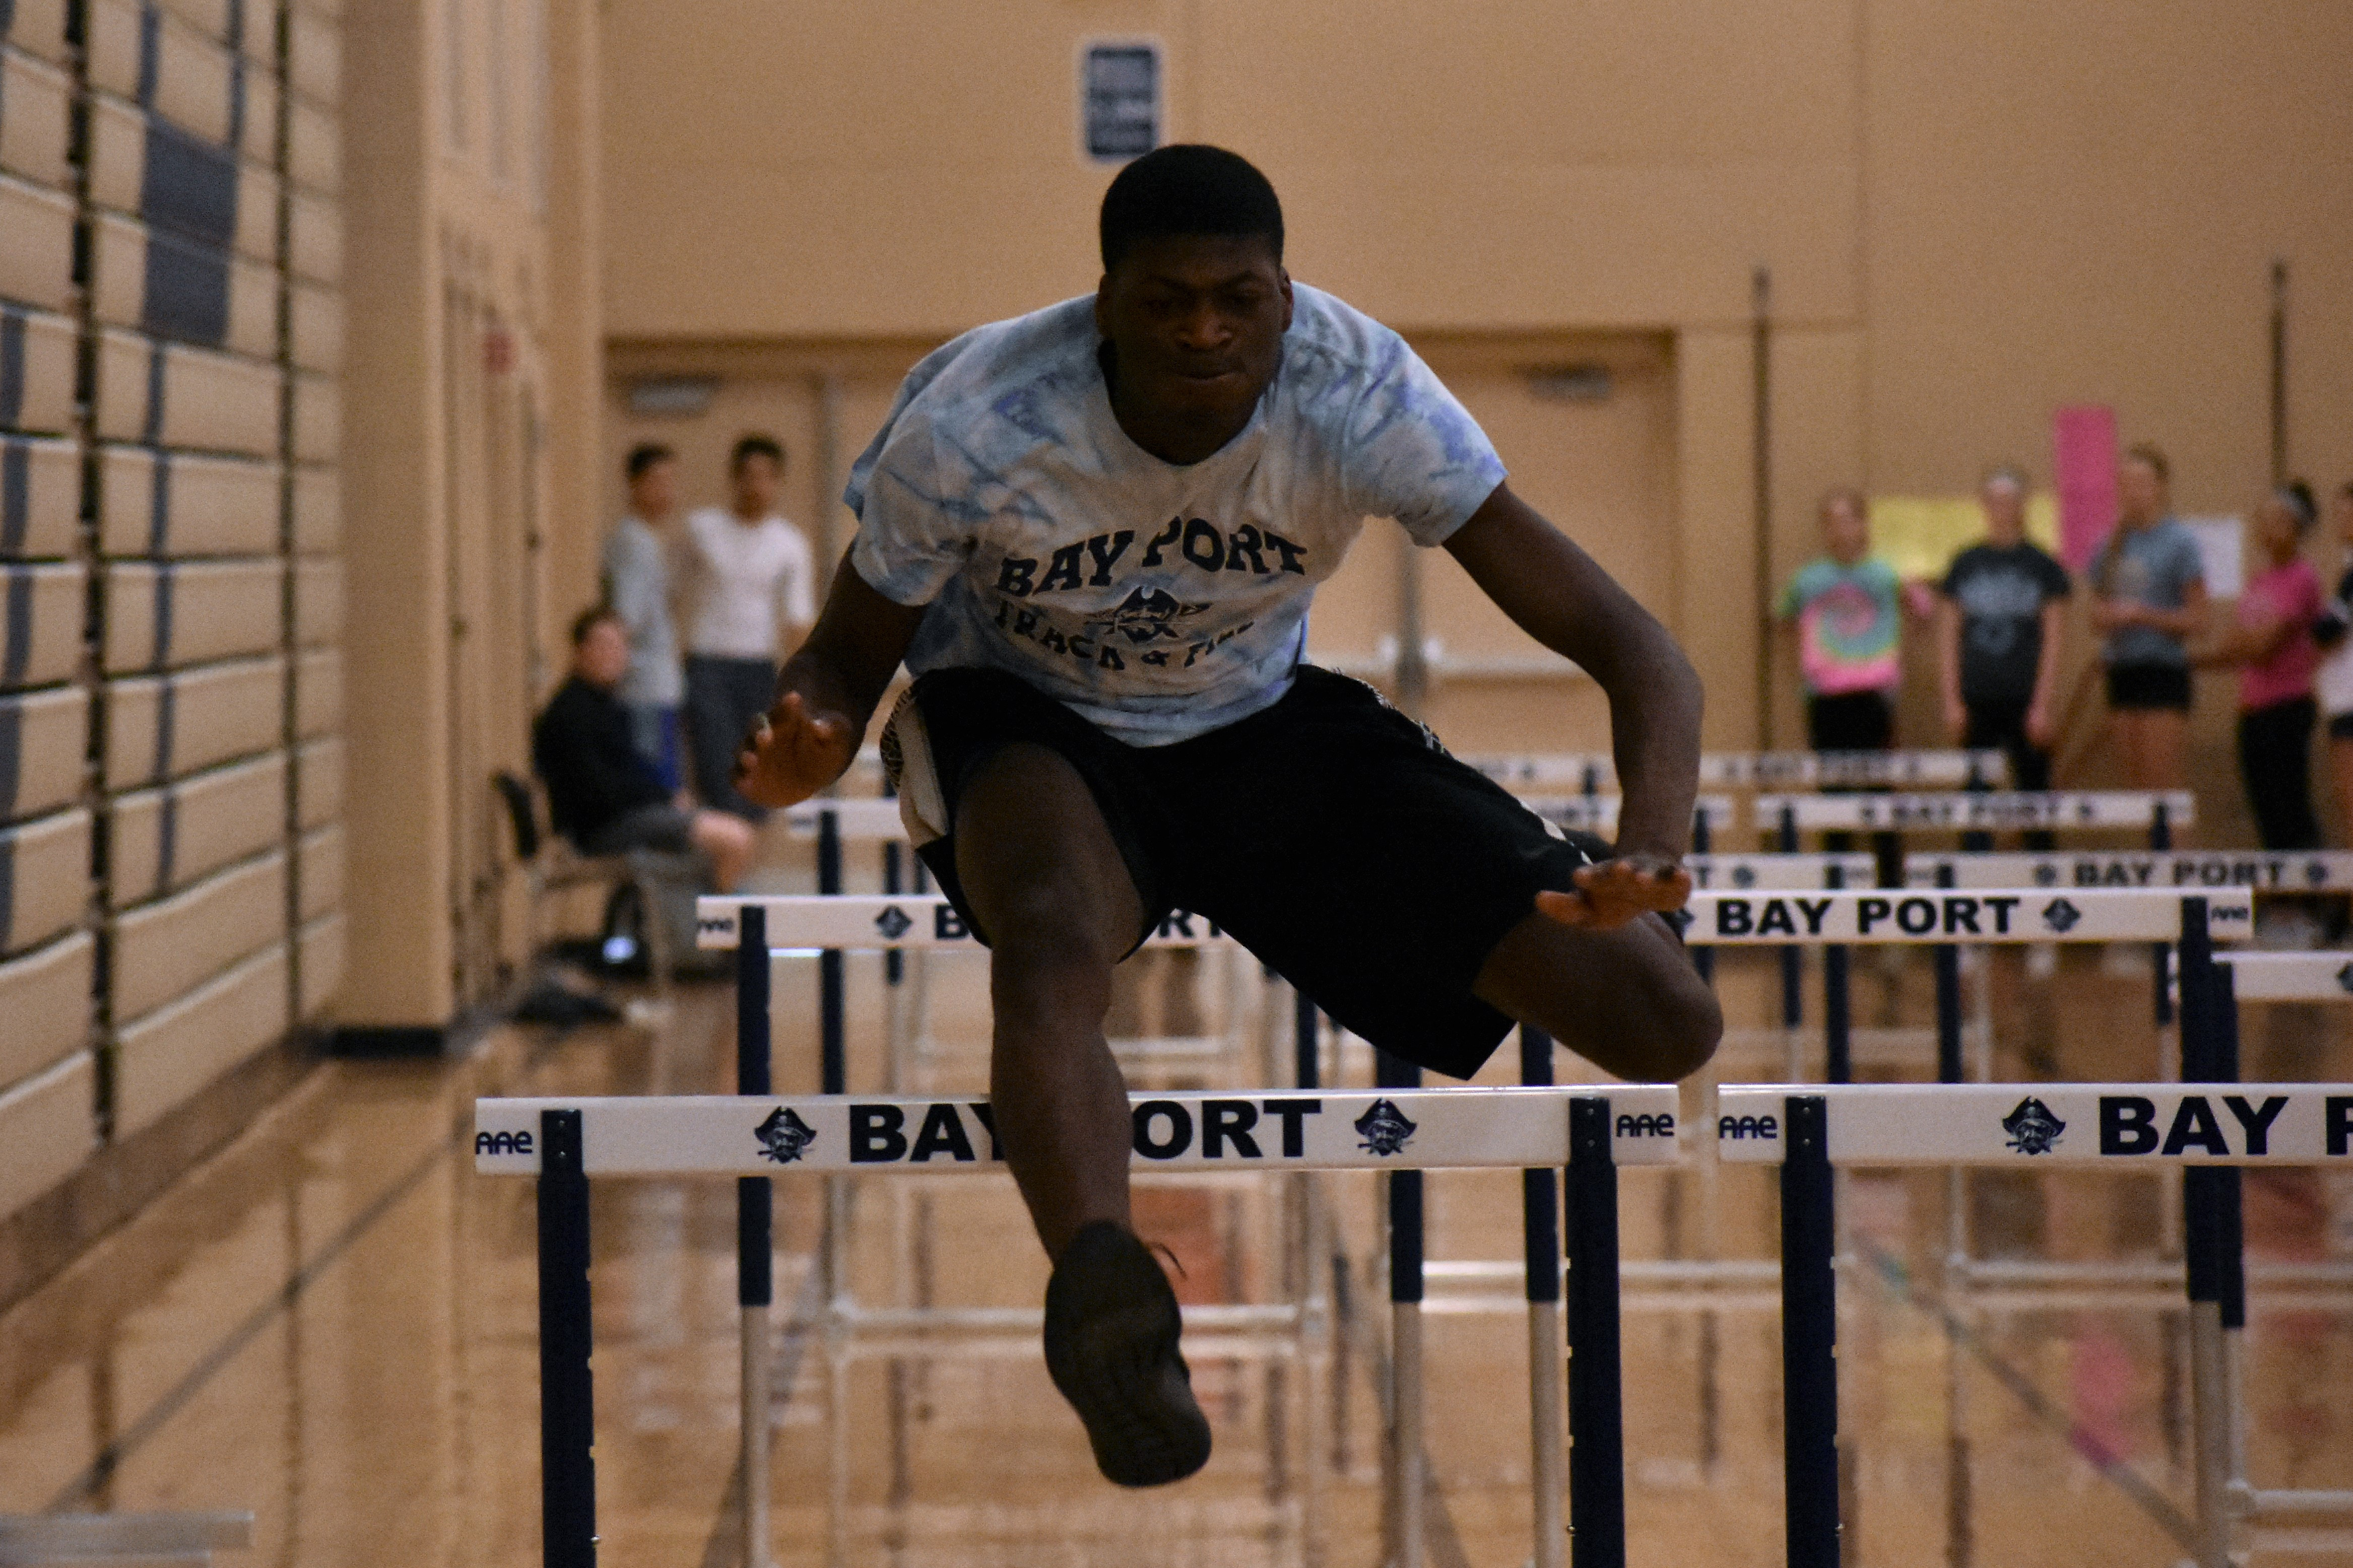 Tinch set to make state history: Bay Port boys’ track & field preview